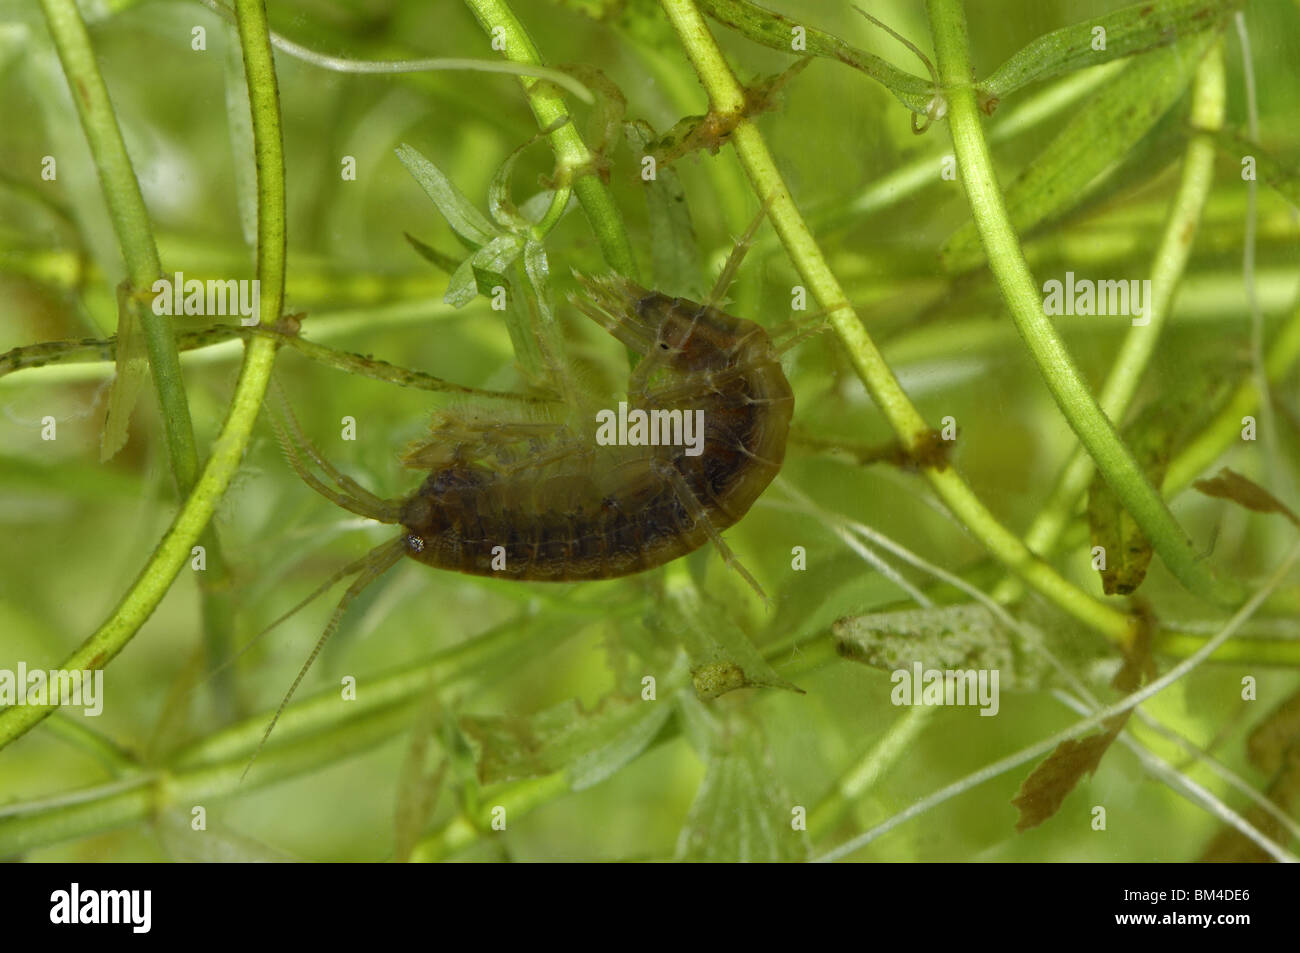 Gammarus shrimp swimming among aquatic plants in a puddle Stock Photo